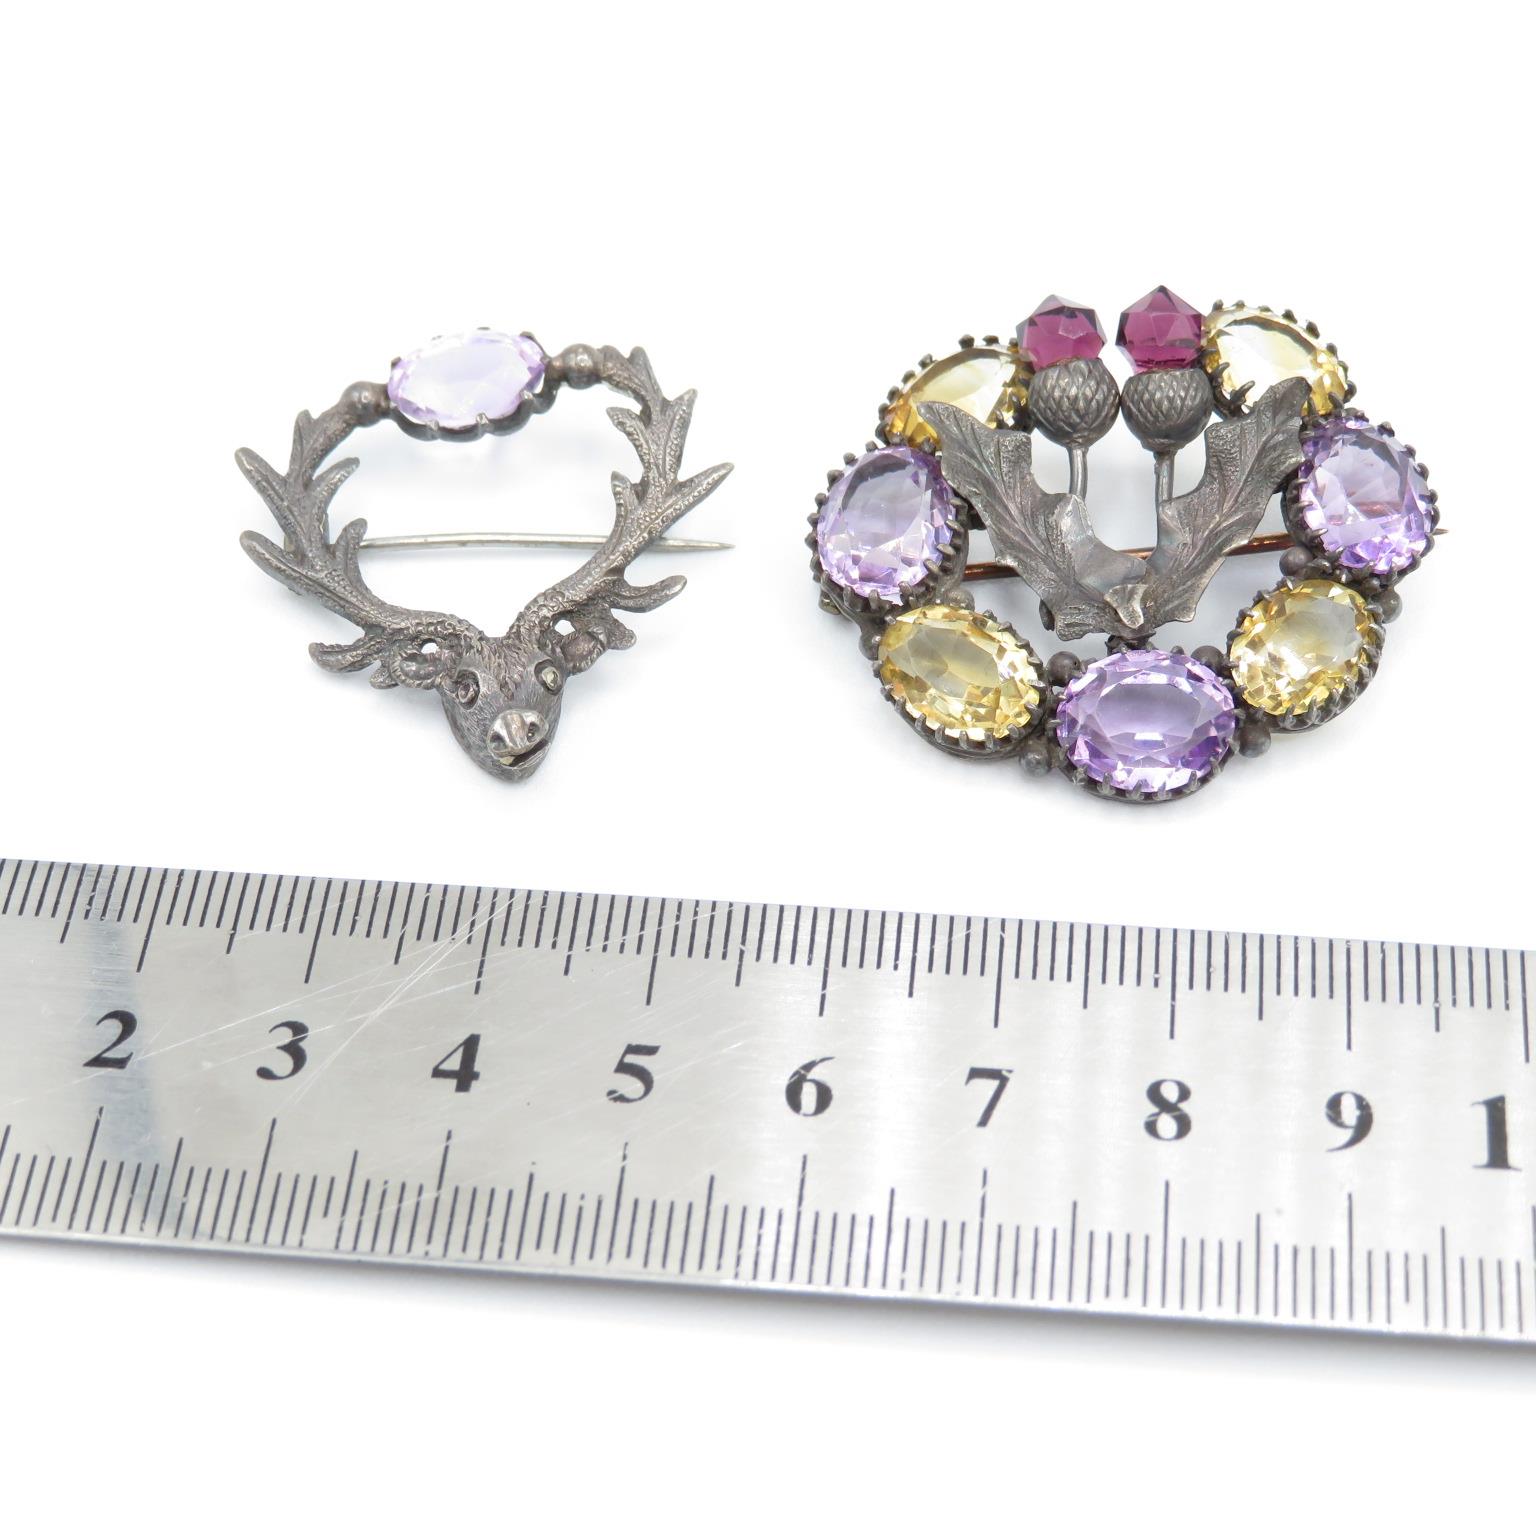 Two silver Scottish brooches with Amethyst & Citrine (17g) - Image 8 of 8